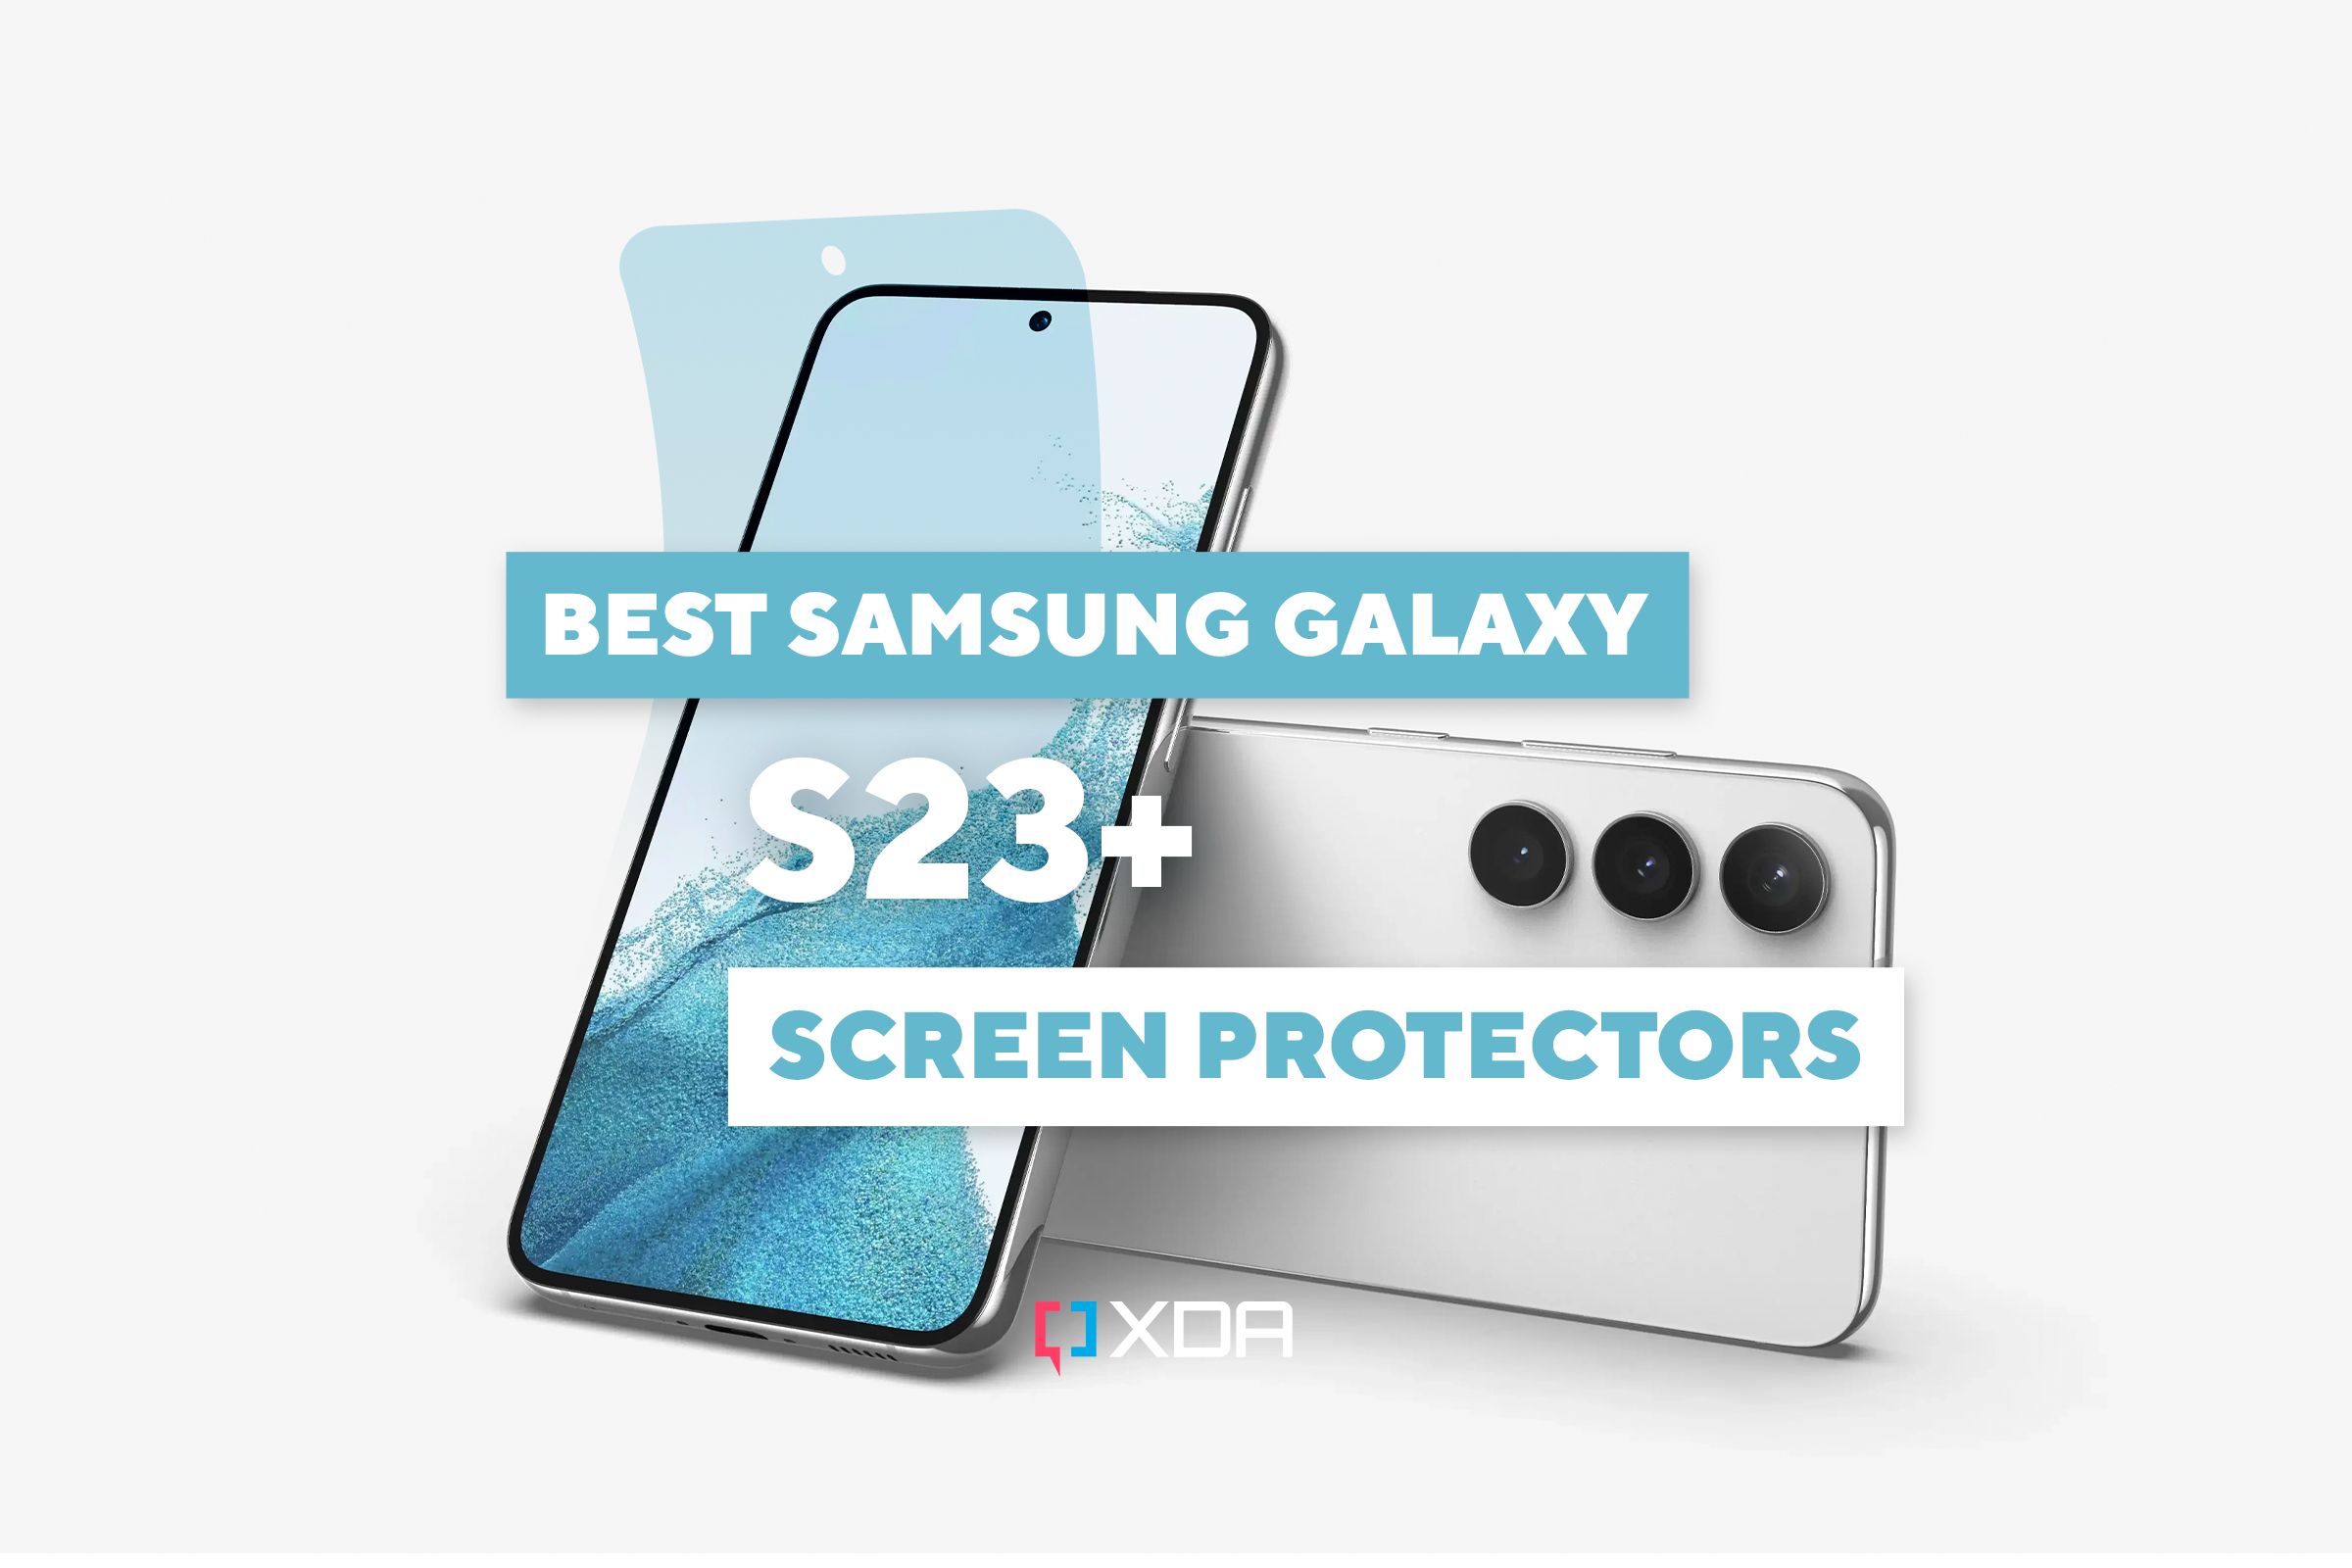 The best Samsung Galaxy S23 Ultra screen protectors in 2023